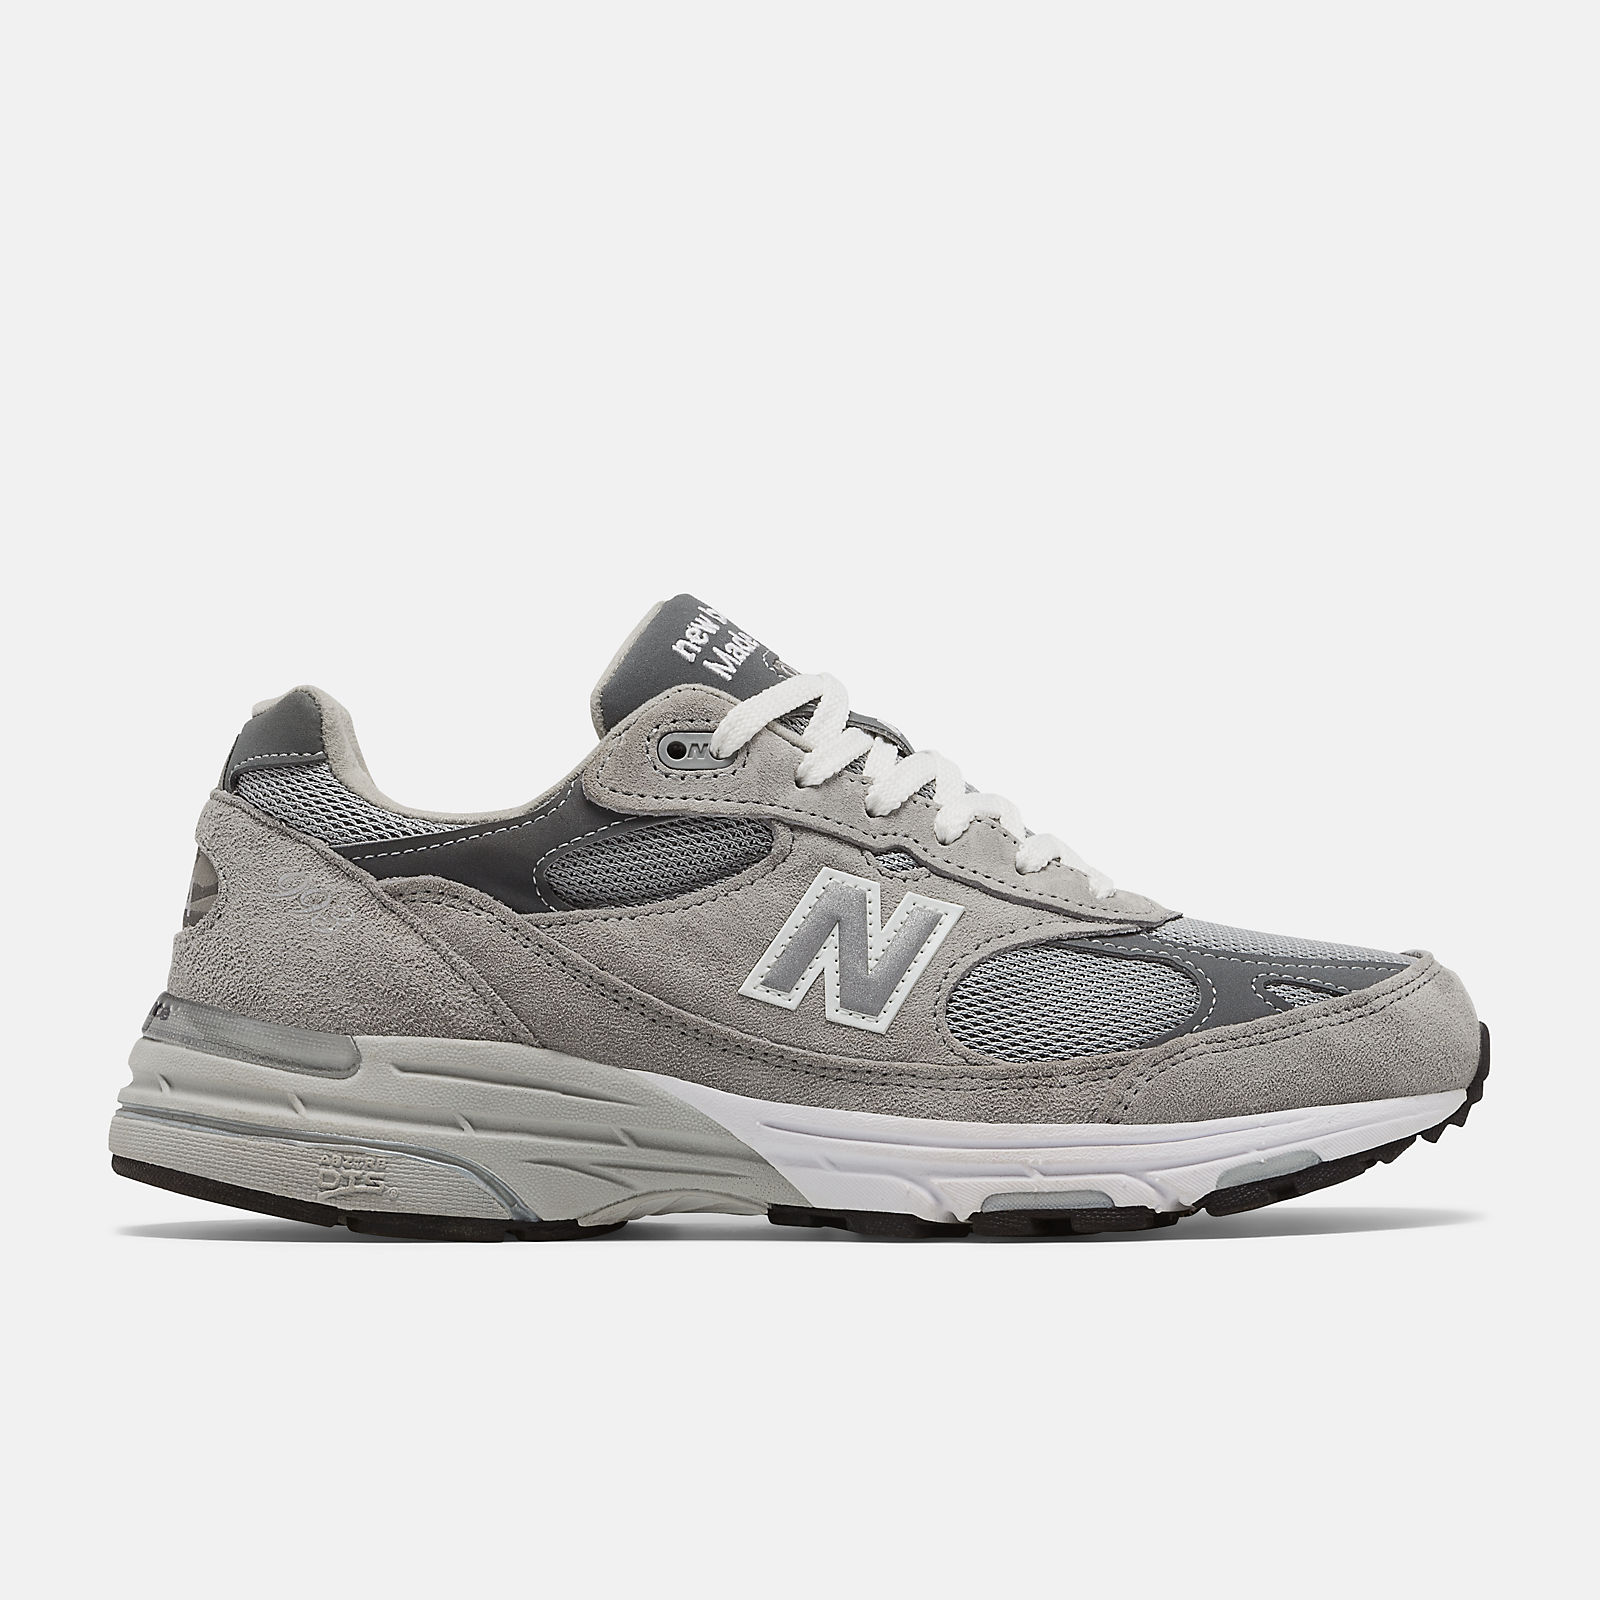 Mens Made in US 993 - New Balance